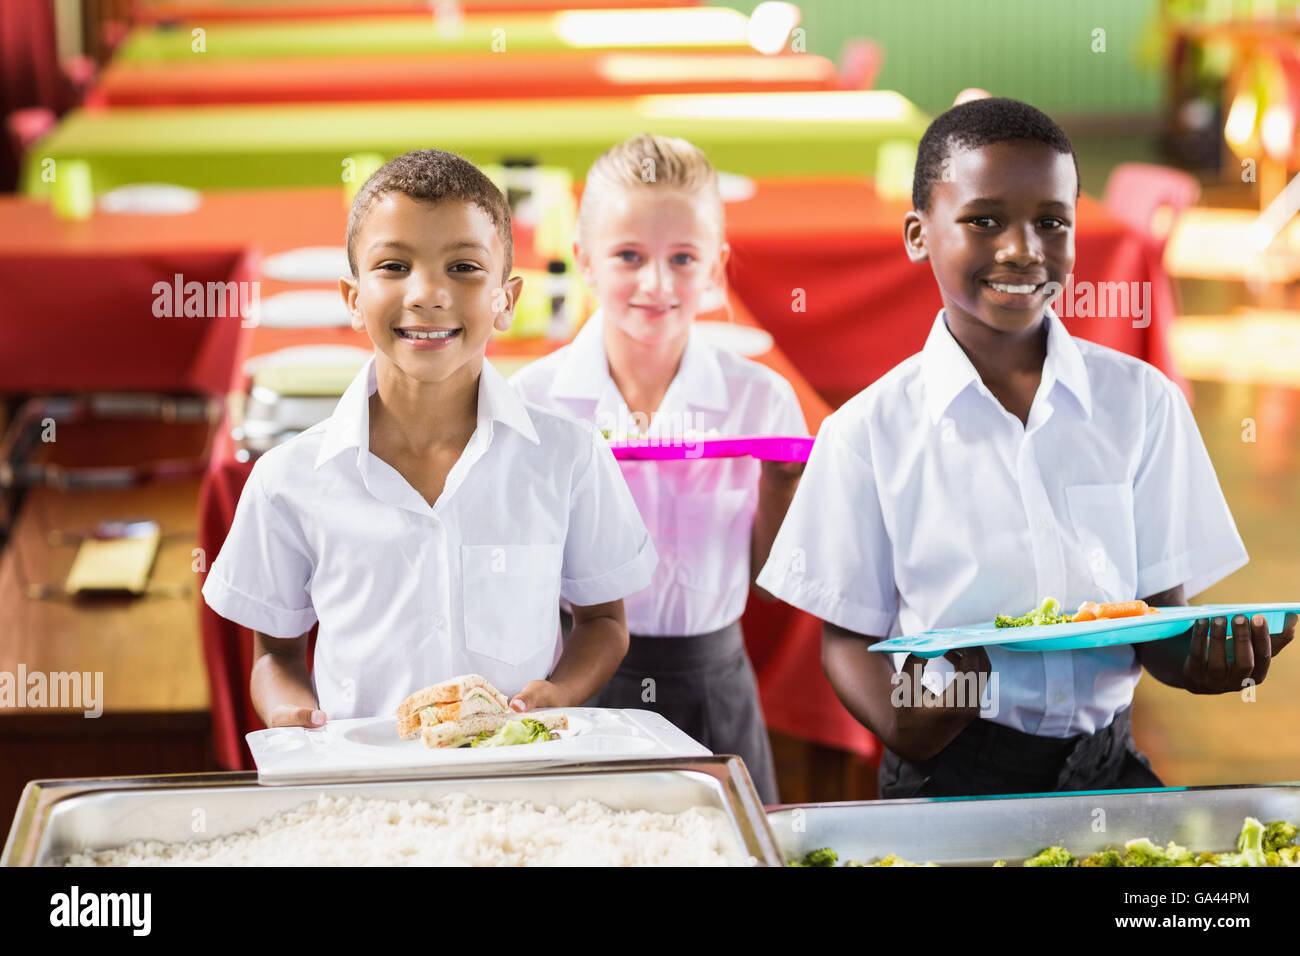 Student holding food tray in school cafeteria Stock Photo